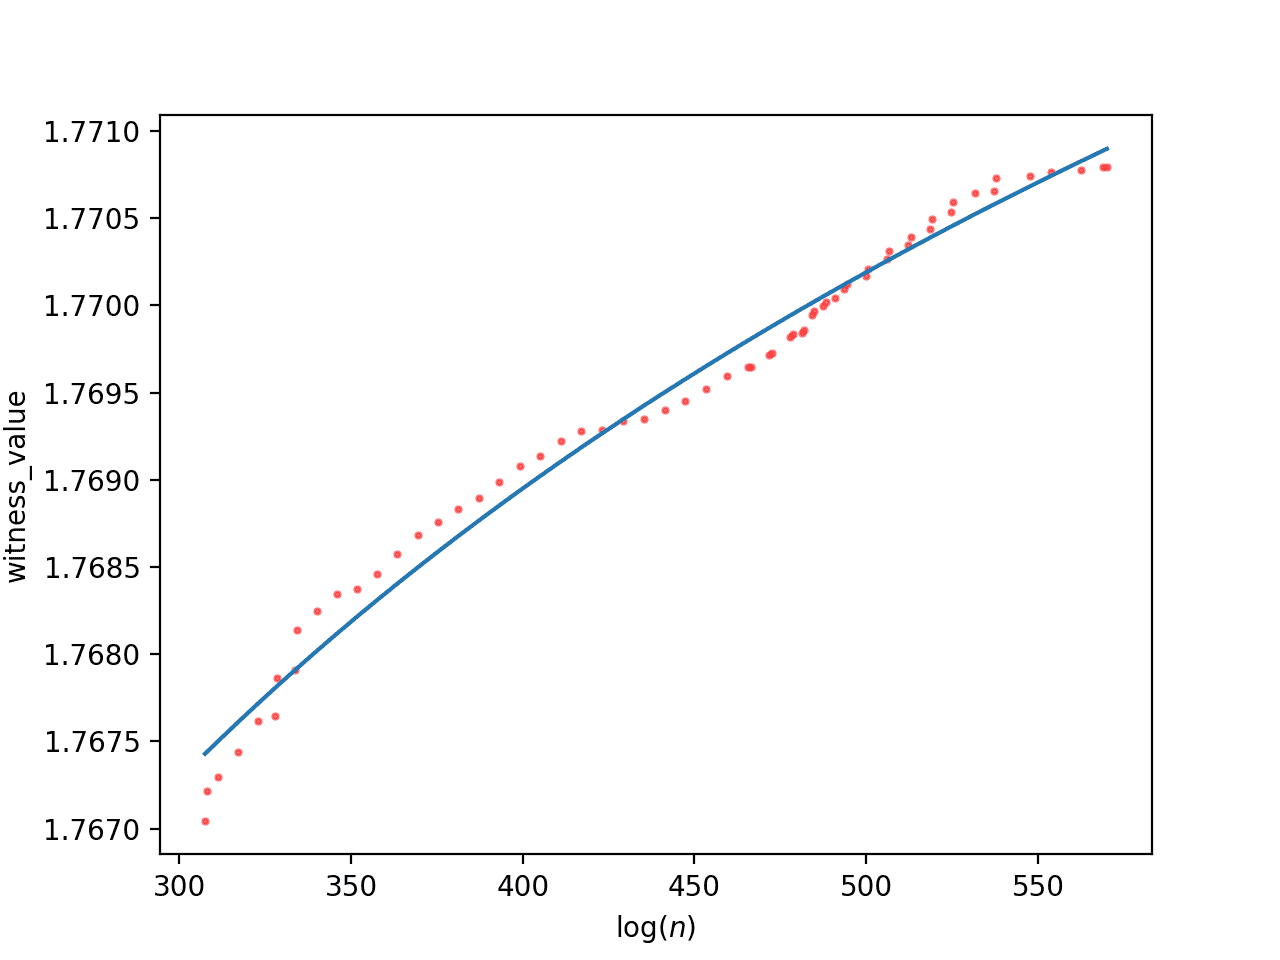 The logarithmic approximation of the small database with RH counterexample estimate at log(n) = 6663